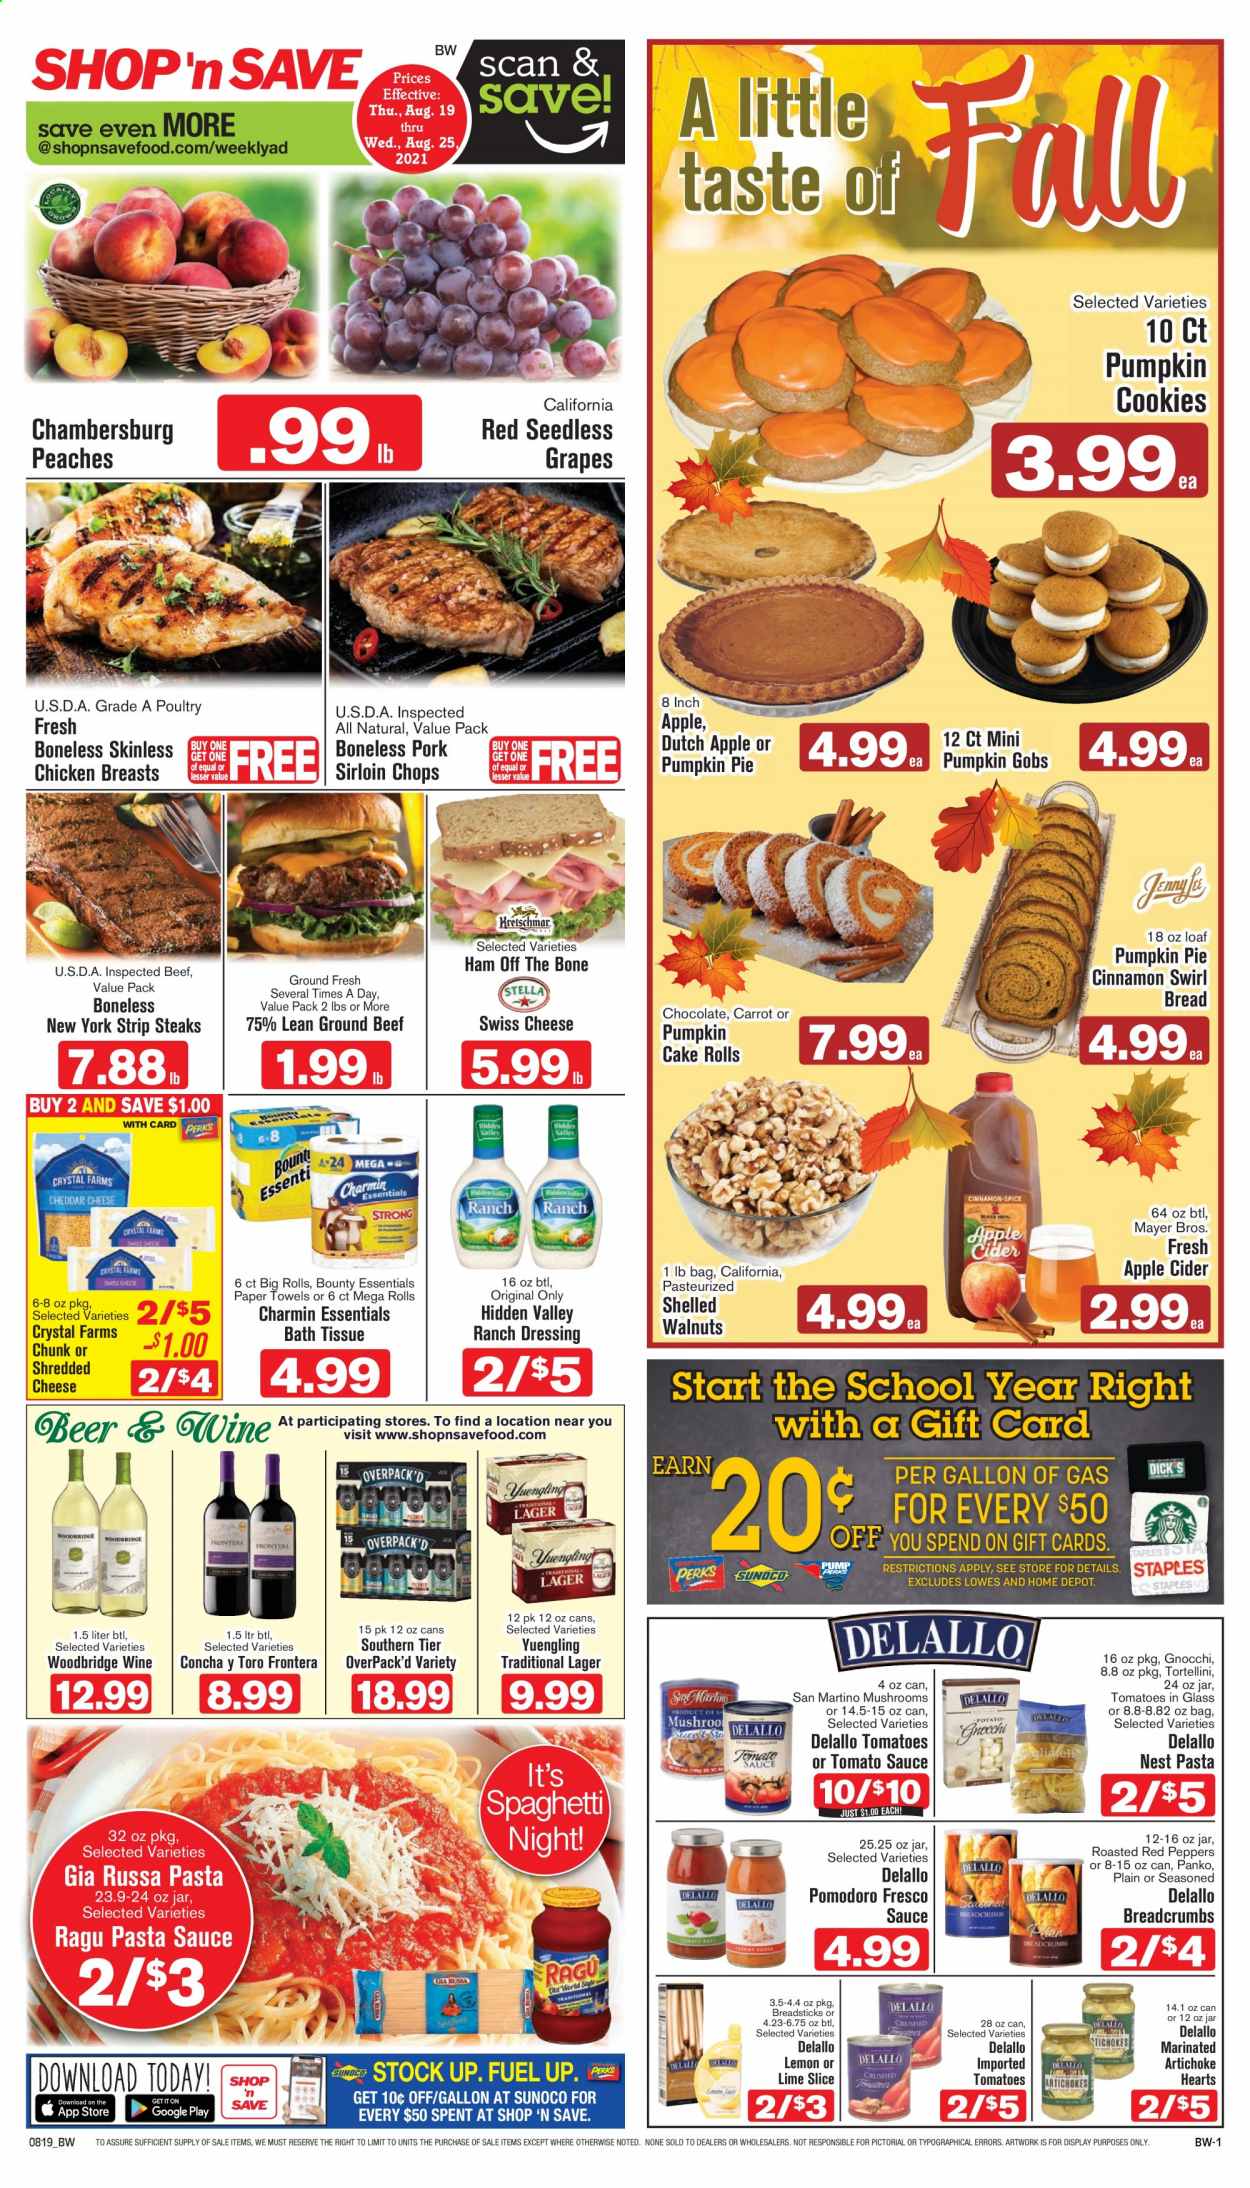 thumbnail - Shop ‘n Save Flyer - 08/19/2021 - 08/25/2021 - Sales products - Yuengling, seedless grapes, bread, cake, pie, breadcrumbs, panko breadcrumbs, artichoke, tomatoes, peppers, red peppers, grapes, chicken breasts, beef meat, ground beef, steak, striploin steak, pork loin, gnocchi, spaghetti, pasta sauce, sauce, tortellini, ragú pasta, ham, ham off the bone, shredded cheese, swiss cheese, ranch dressing, cookies, chocolate, Bounty, bread sticks, tomato sauce, cinnamon, dressing, ragu, walnuts, Woodbridge, apple cider, cider, beer, Lager, bath tissue, kitchen towels, paper towels, Charmin, peaches. Page 1.